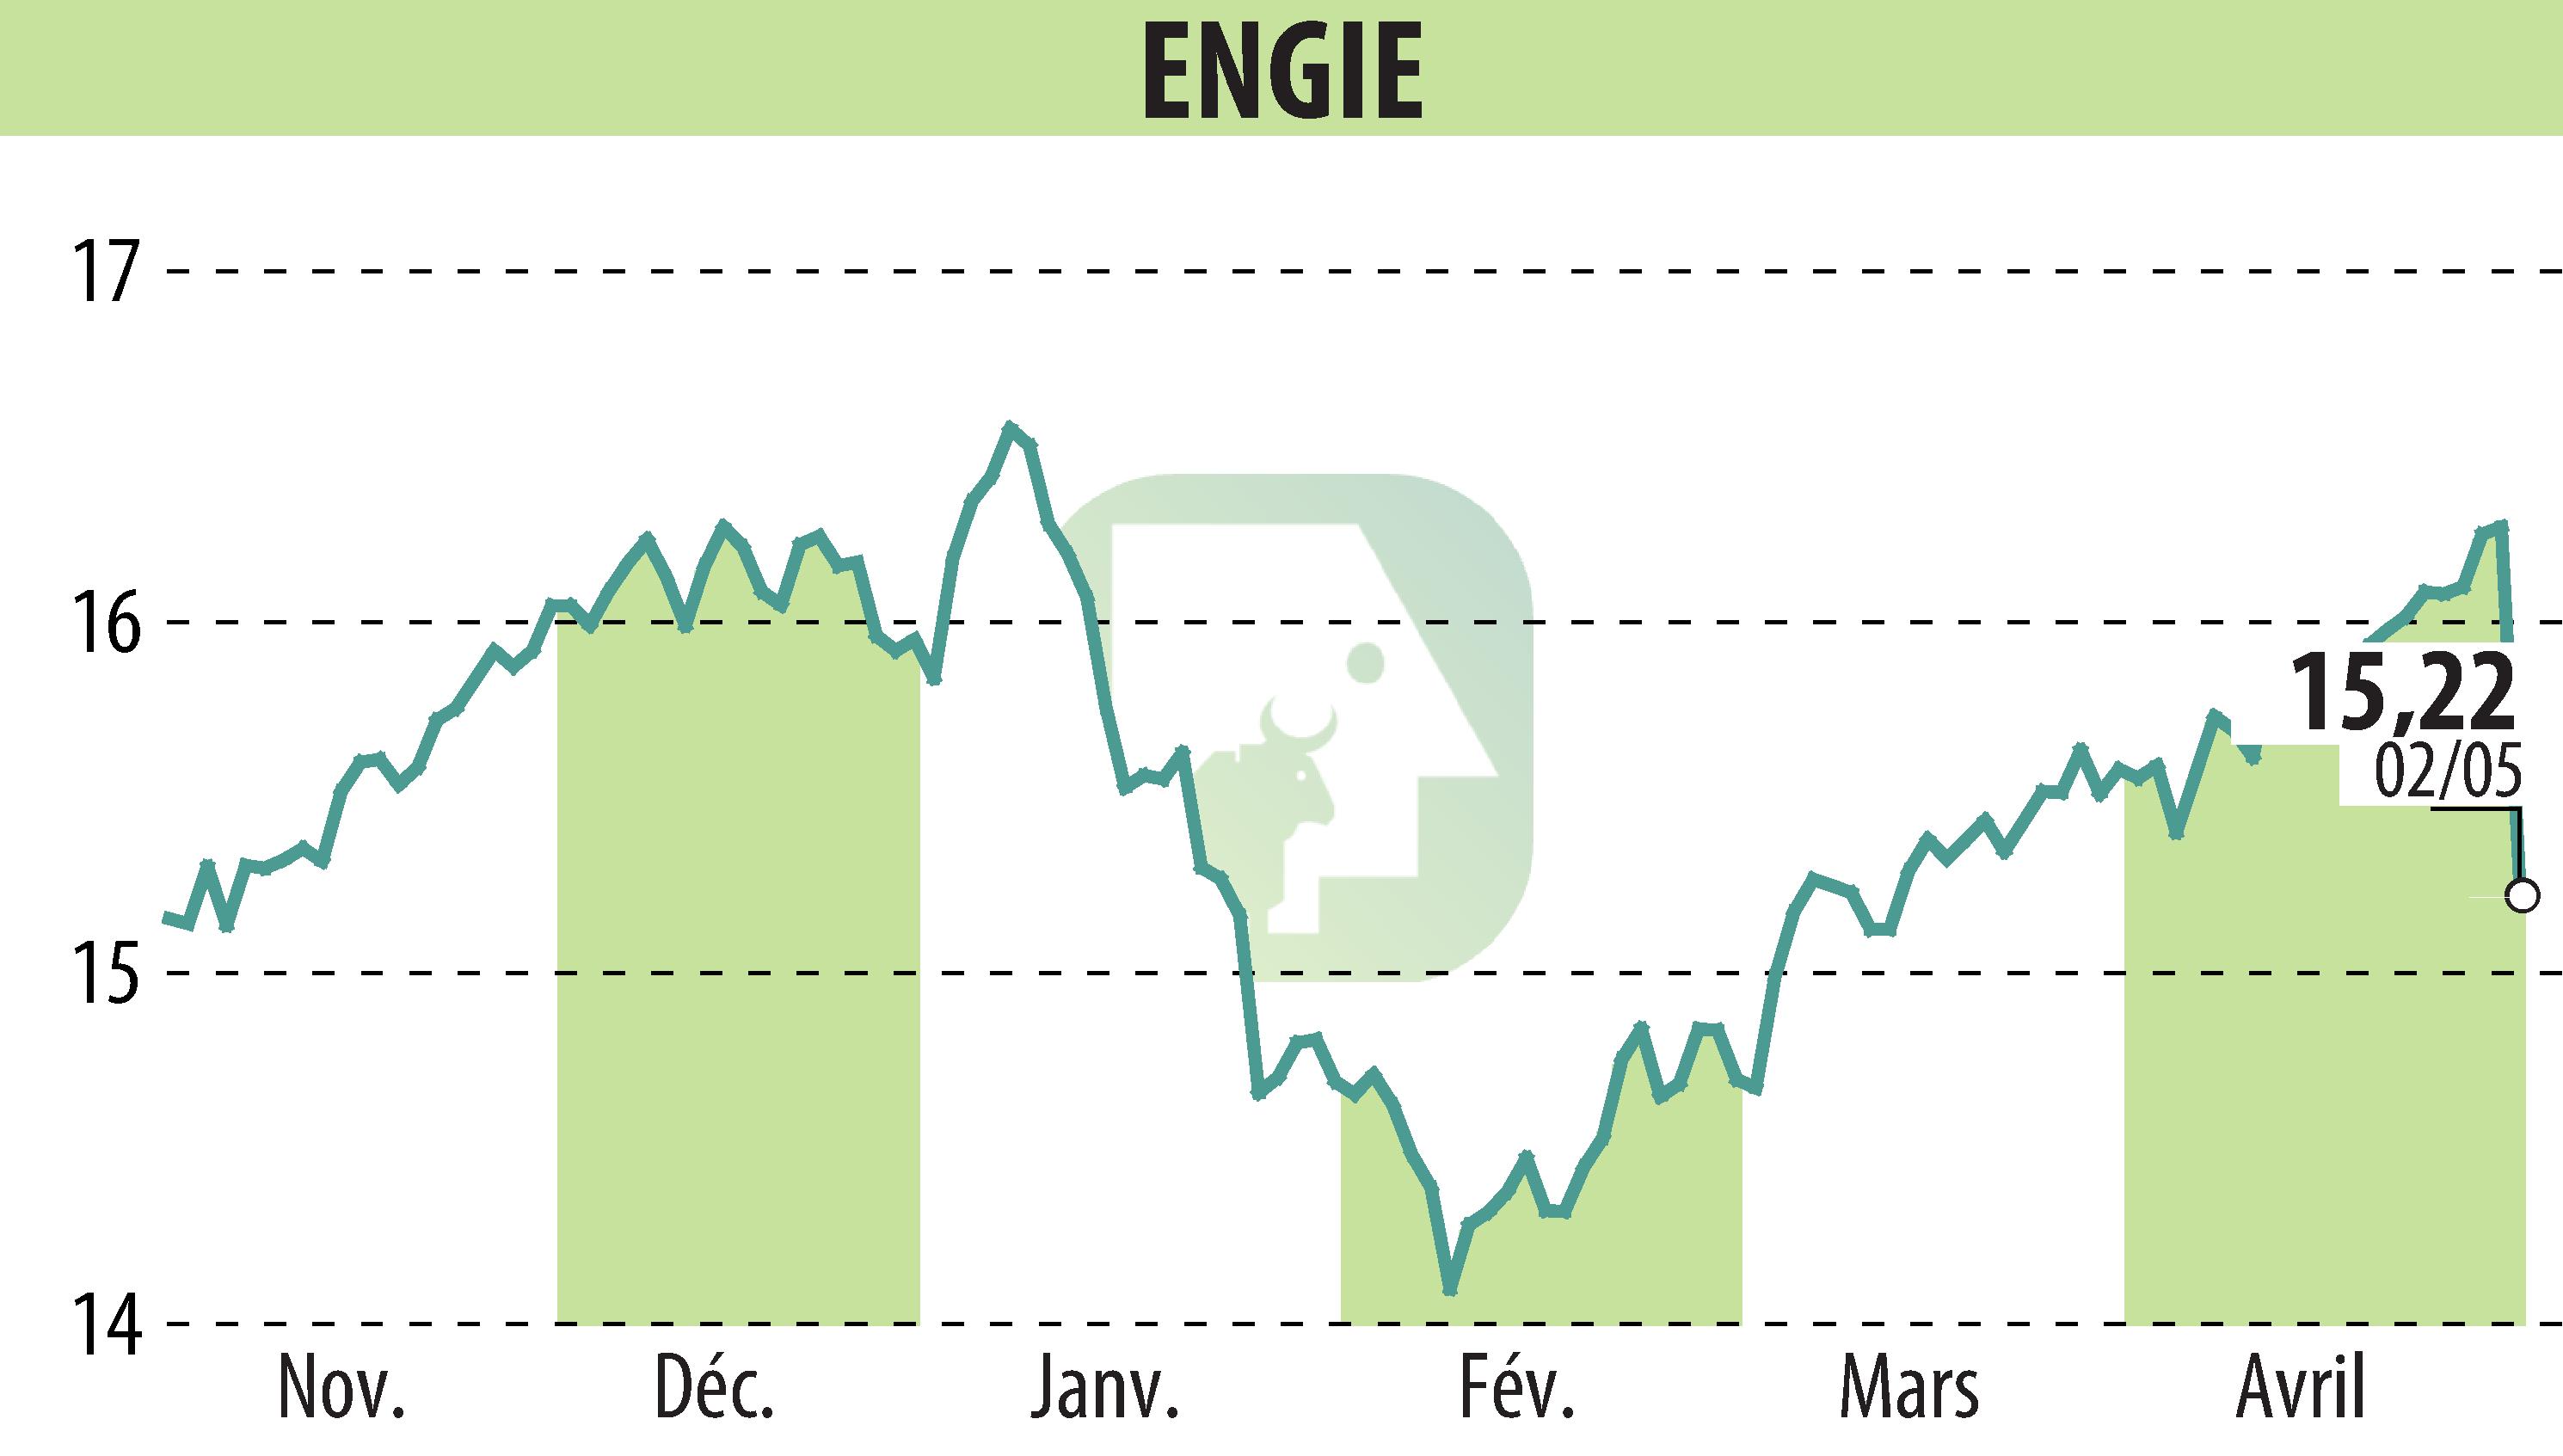 Stock price chart of ENGIE (EPA:ENGI) showing fluctuations.